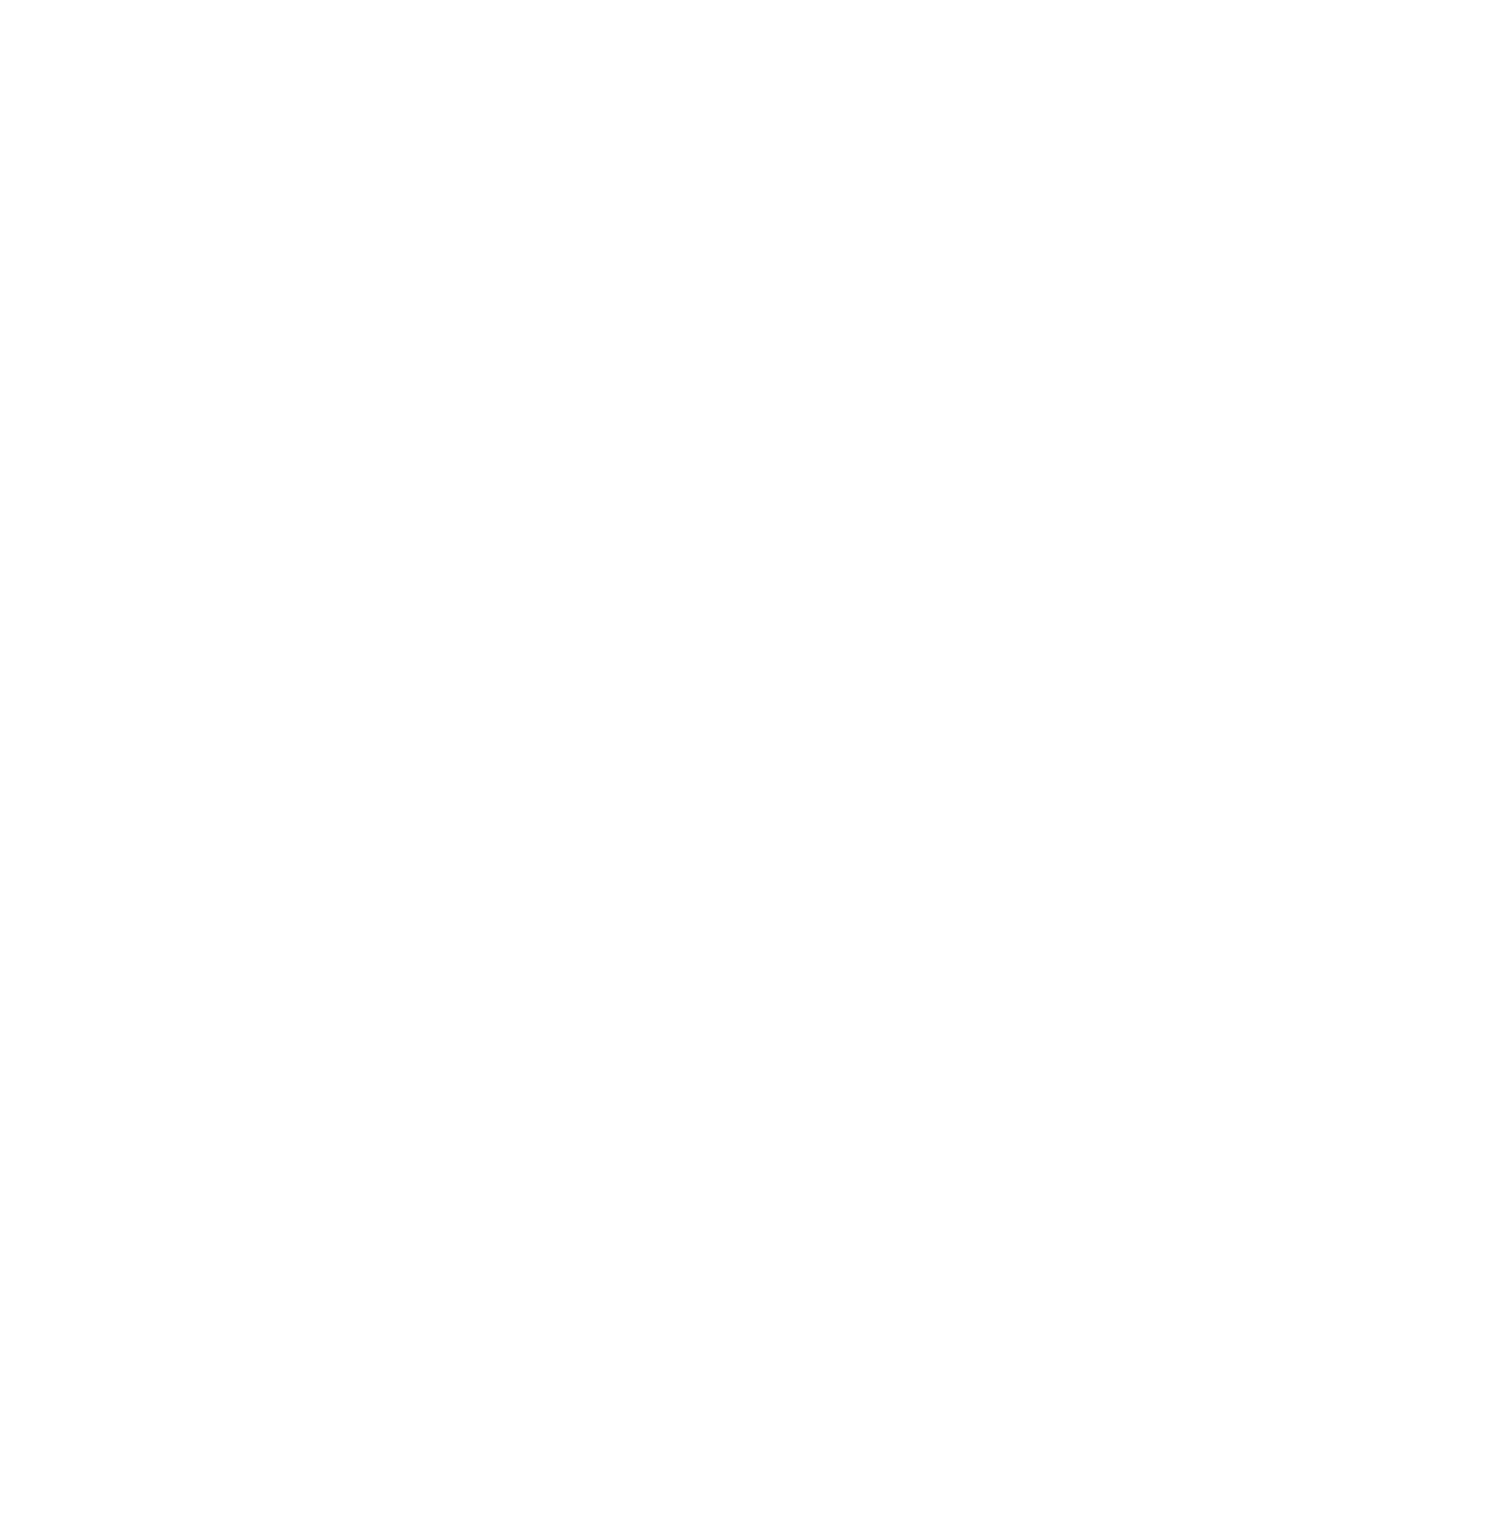 PlushyHost.com - Professional Airbnb Management and Hosting + Luxury Vacation Rental Management